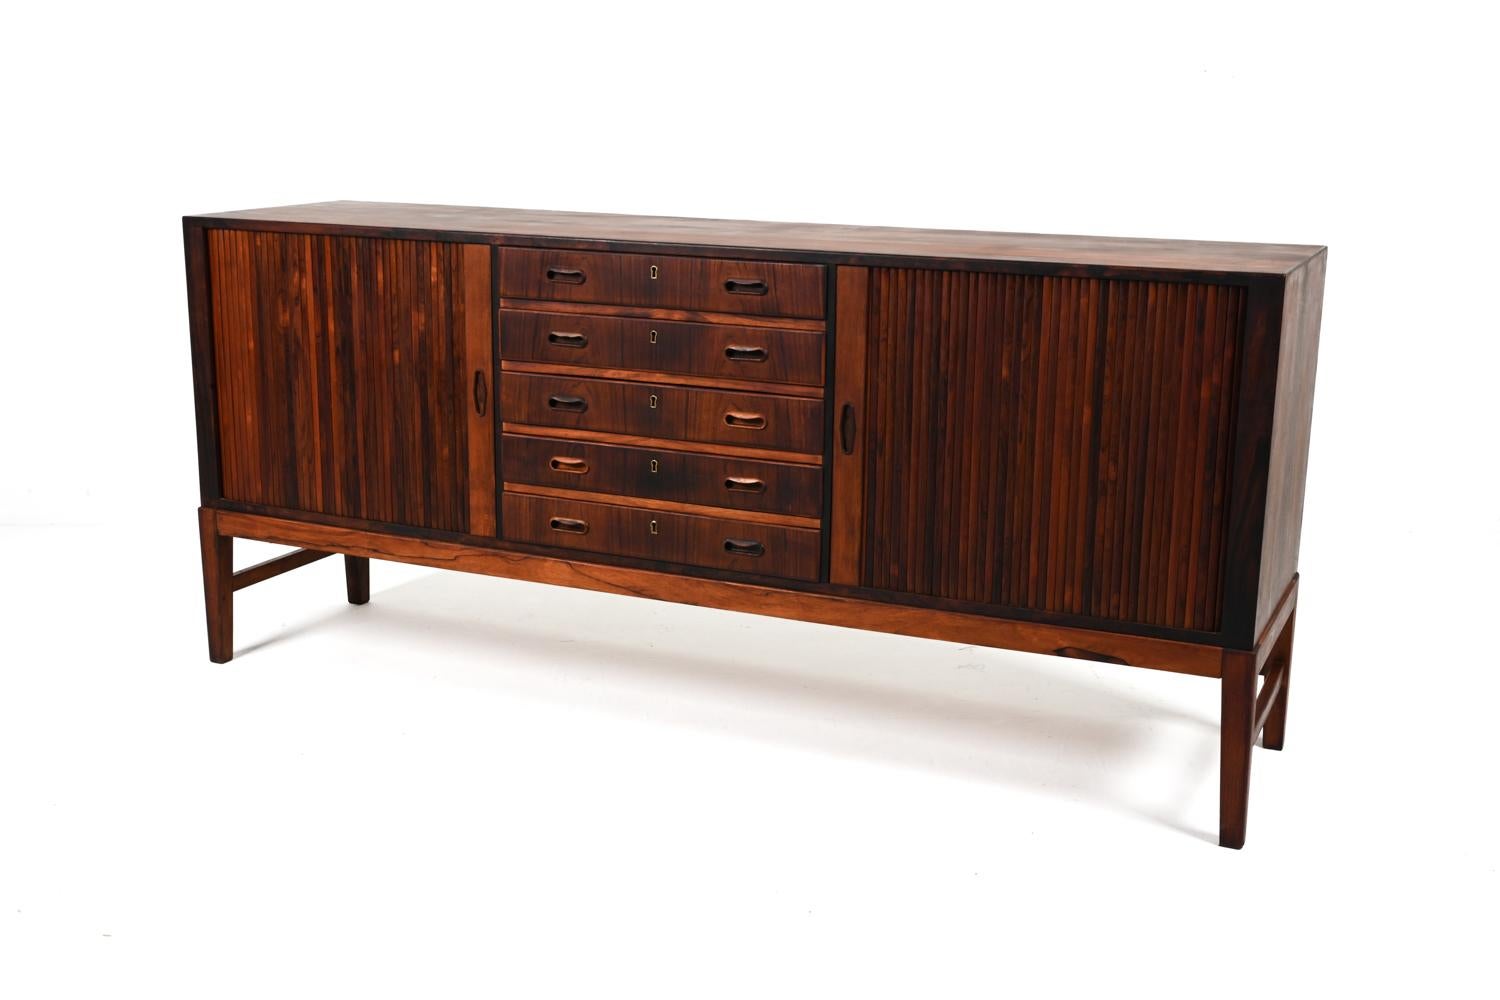 Luxuriate in the perfect symmetry of this exceptional Danish Modern sideboard, modeled after Ole Wanscher's timeless design for A. J. Iversen. 
This piece marries functionality and quiet beauty in a quintessentially Scandinavian way - with the rich